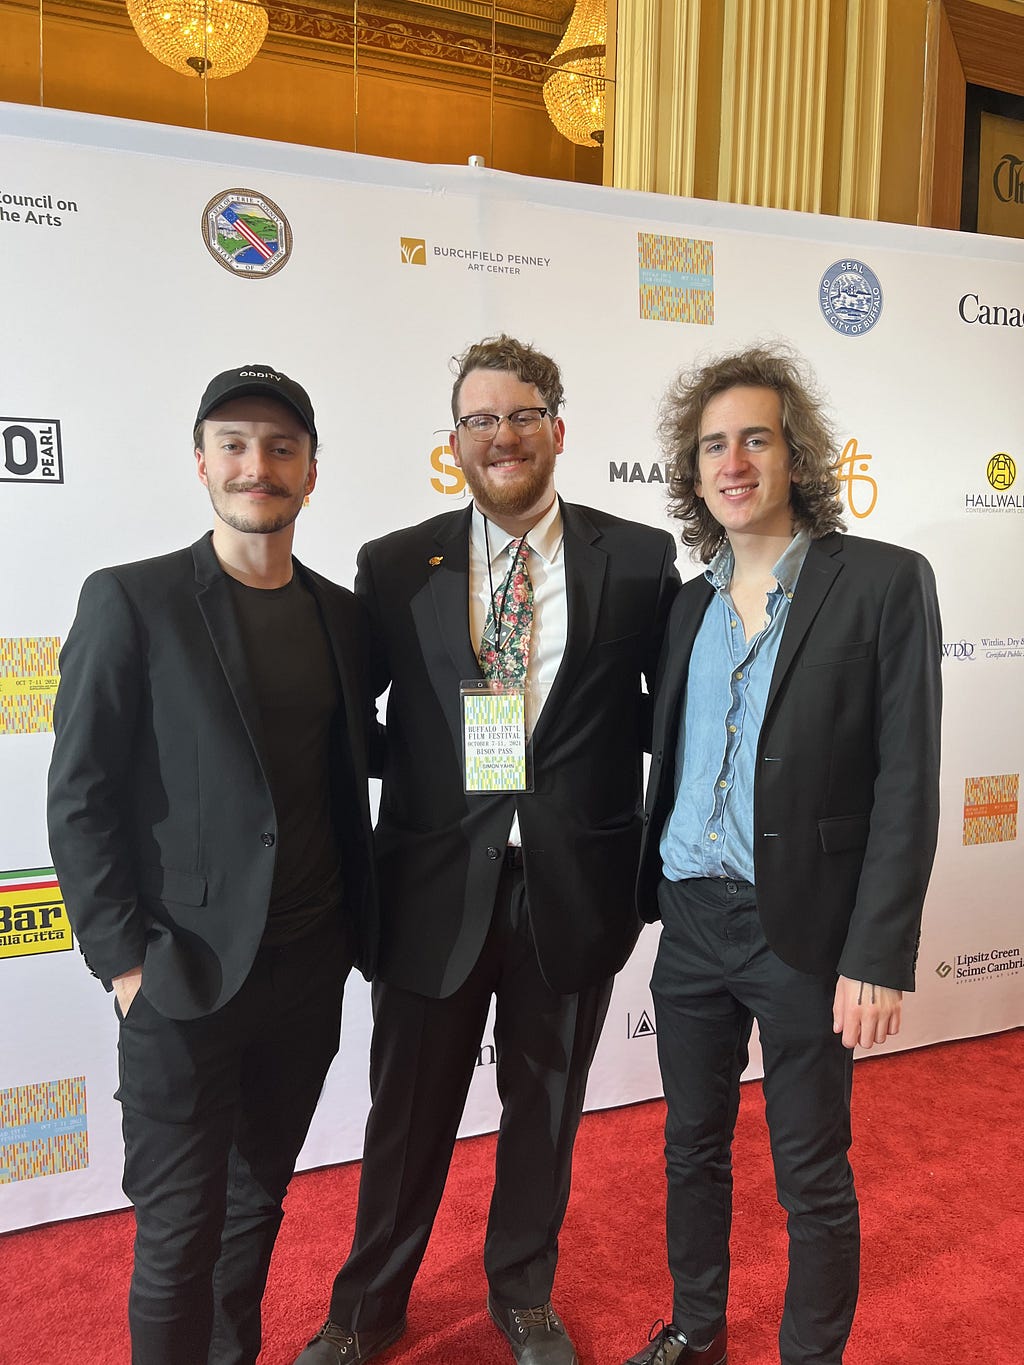 Liam O’Brien, Simon Yahn, and Danny Pakulski standing on a red carpet in front of a logo backdrop at the Buffalo International Film Festival